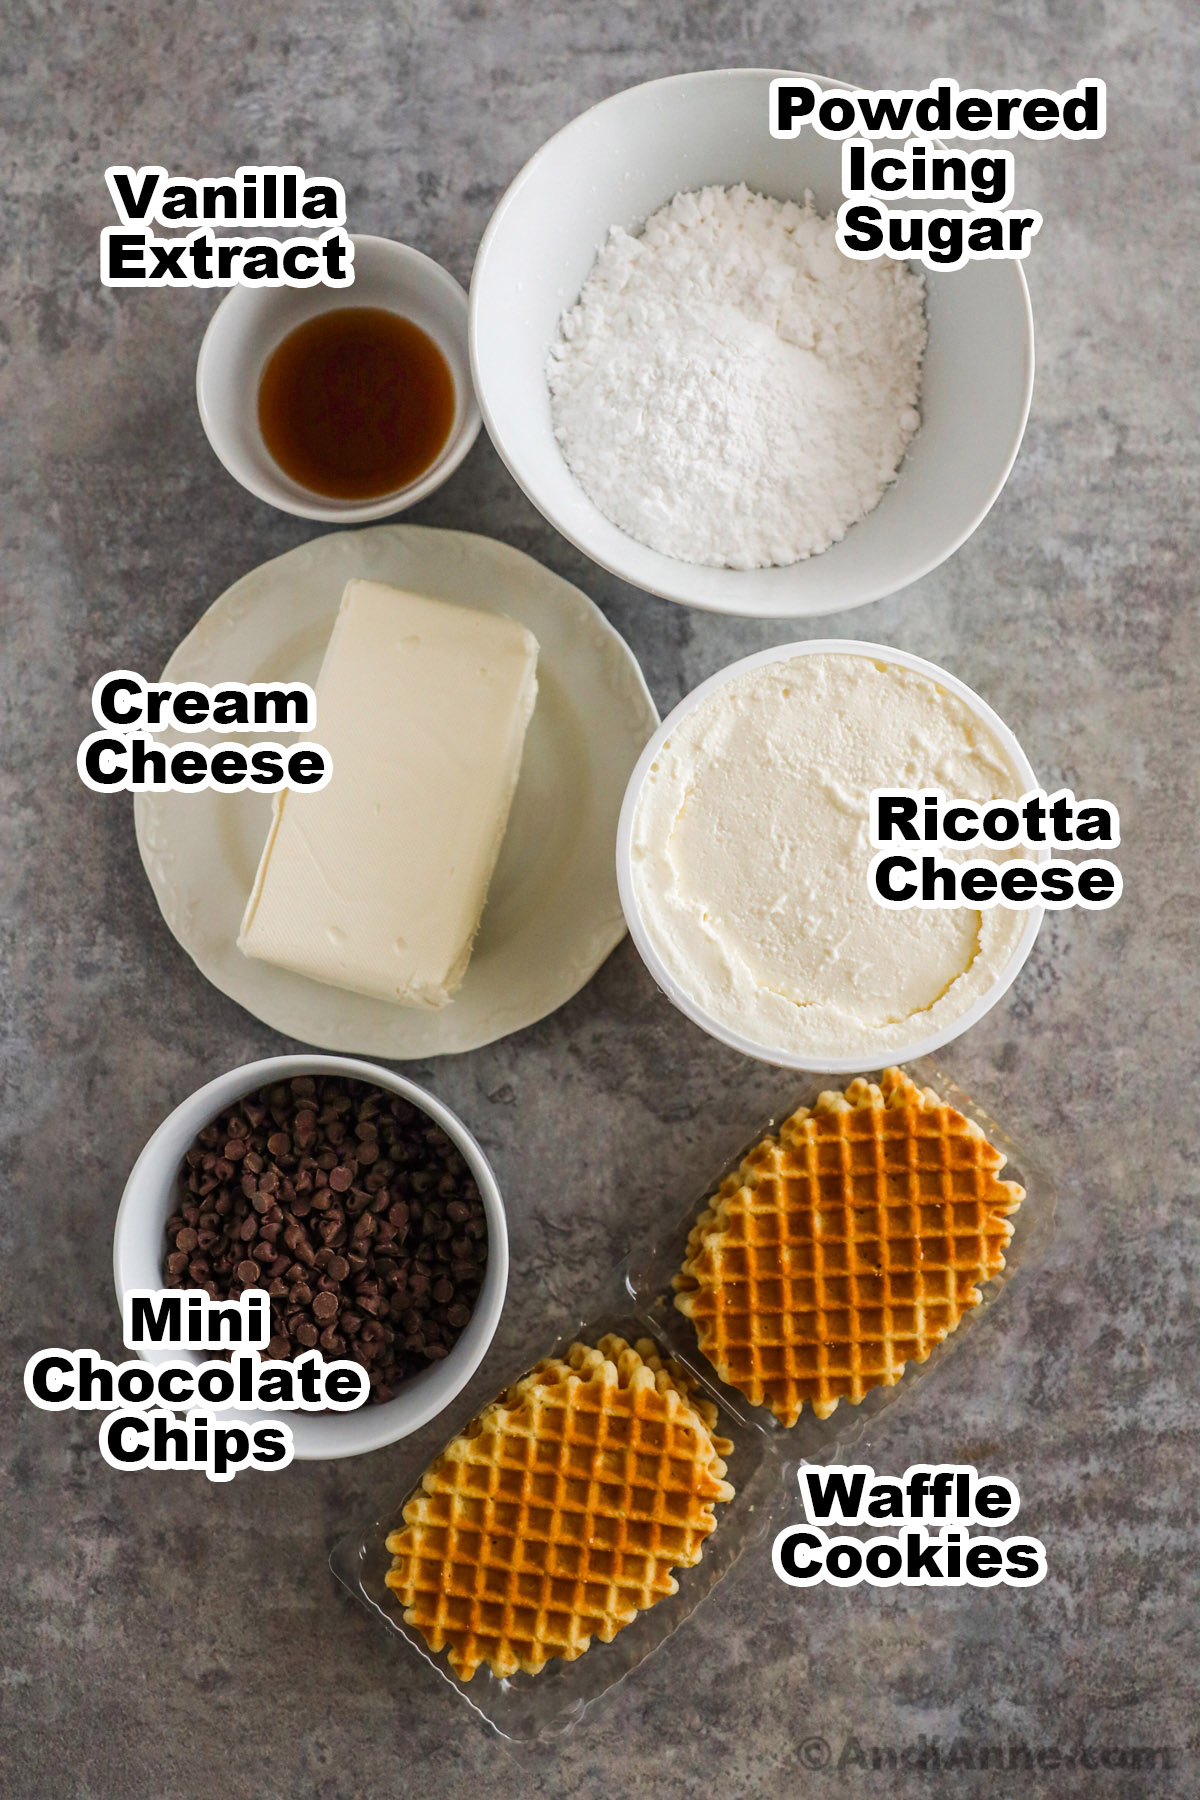 Recipe ingredients on the counter including bowls of vanilla extract, confectioners sugar, cream cheese, ricotta cheese, mini chocolate chips and butter waffle cookies.